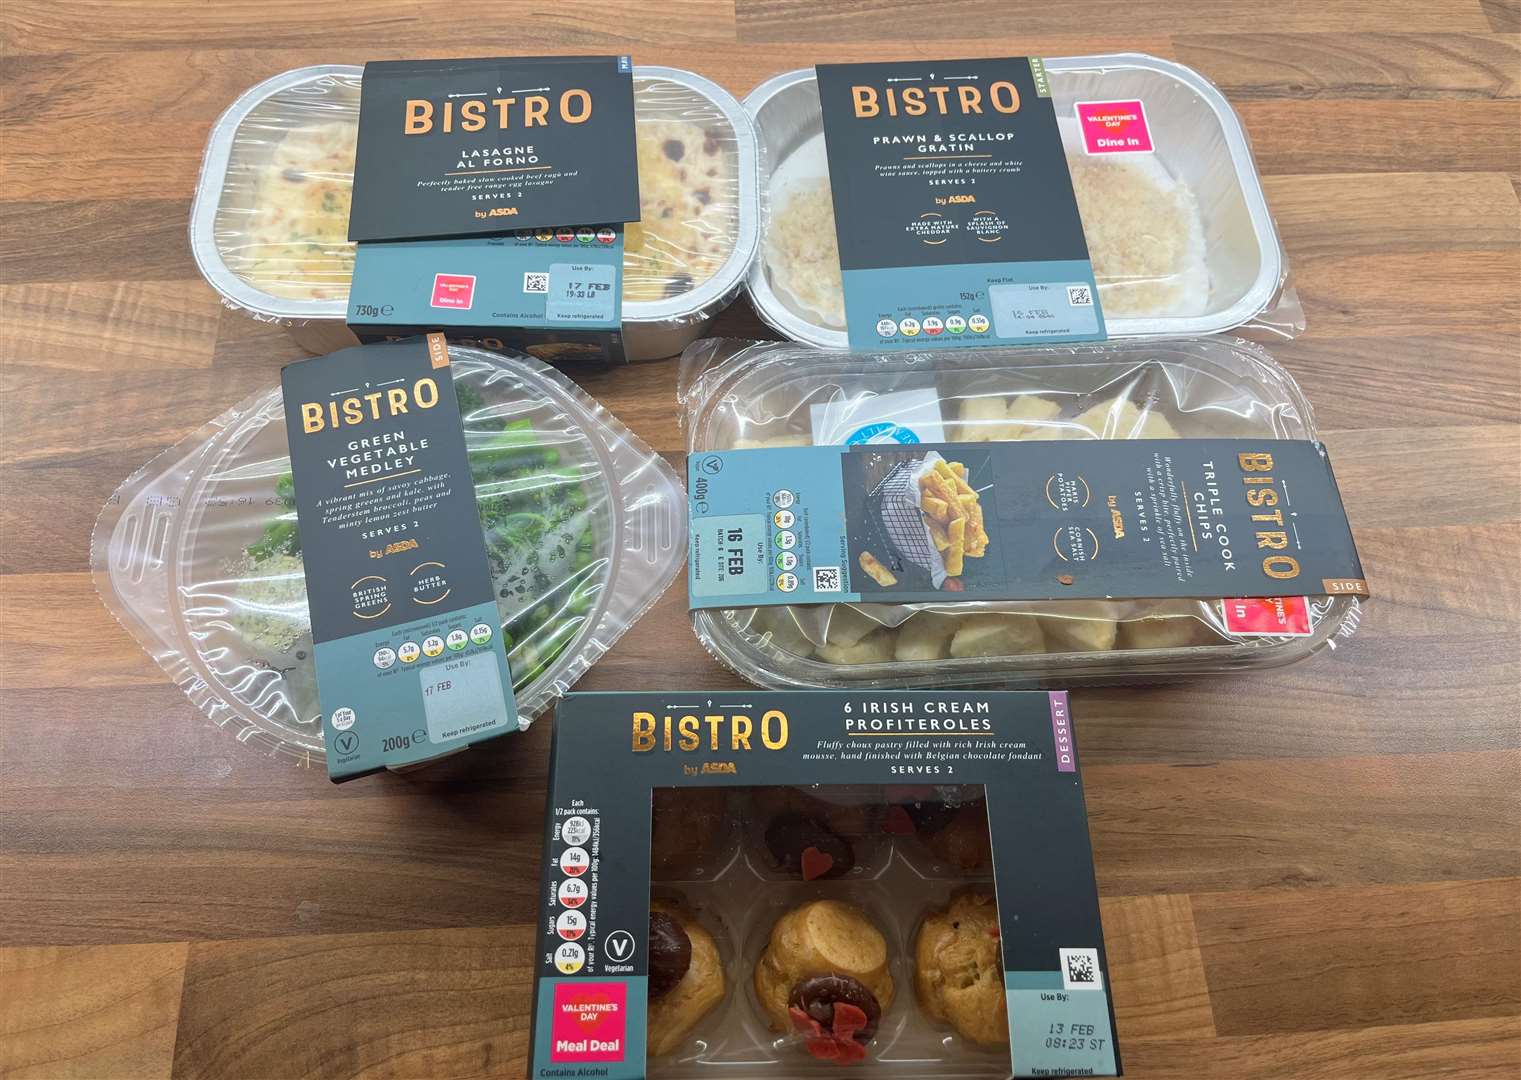 The food included in the Asda meal deal for £12